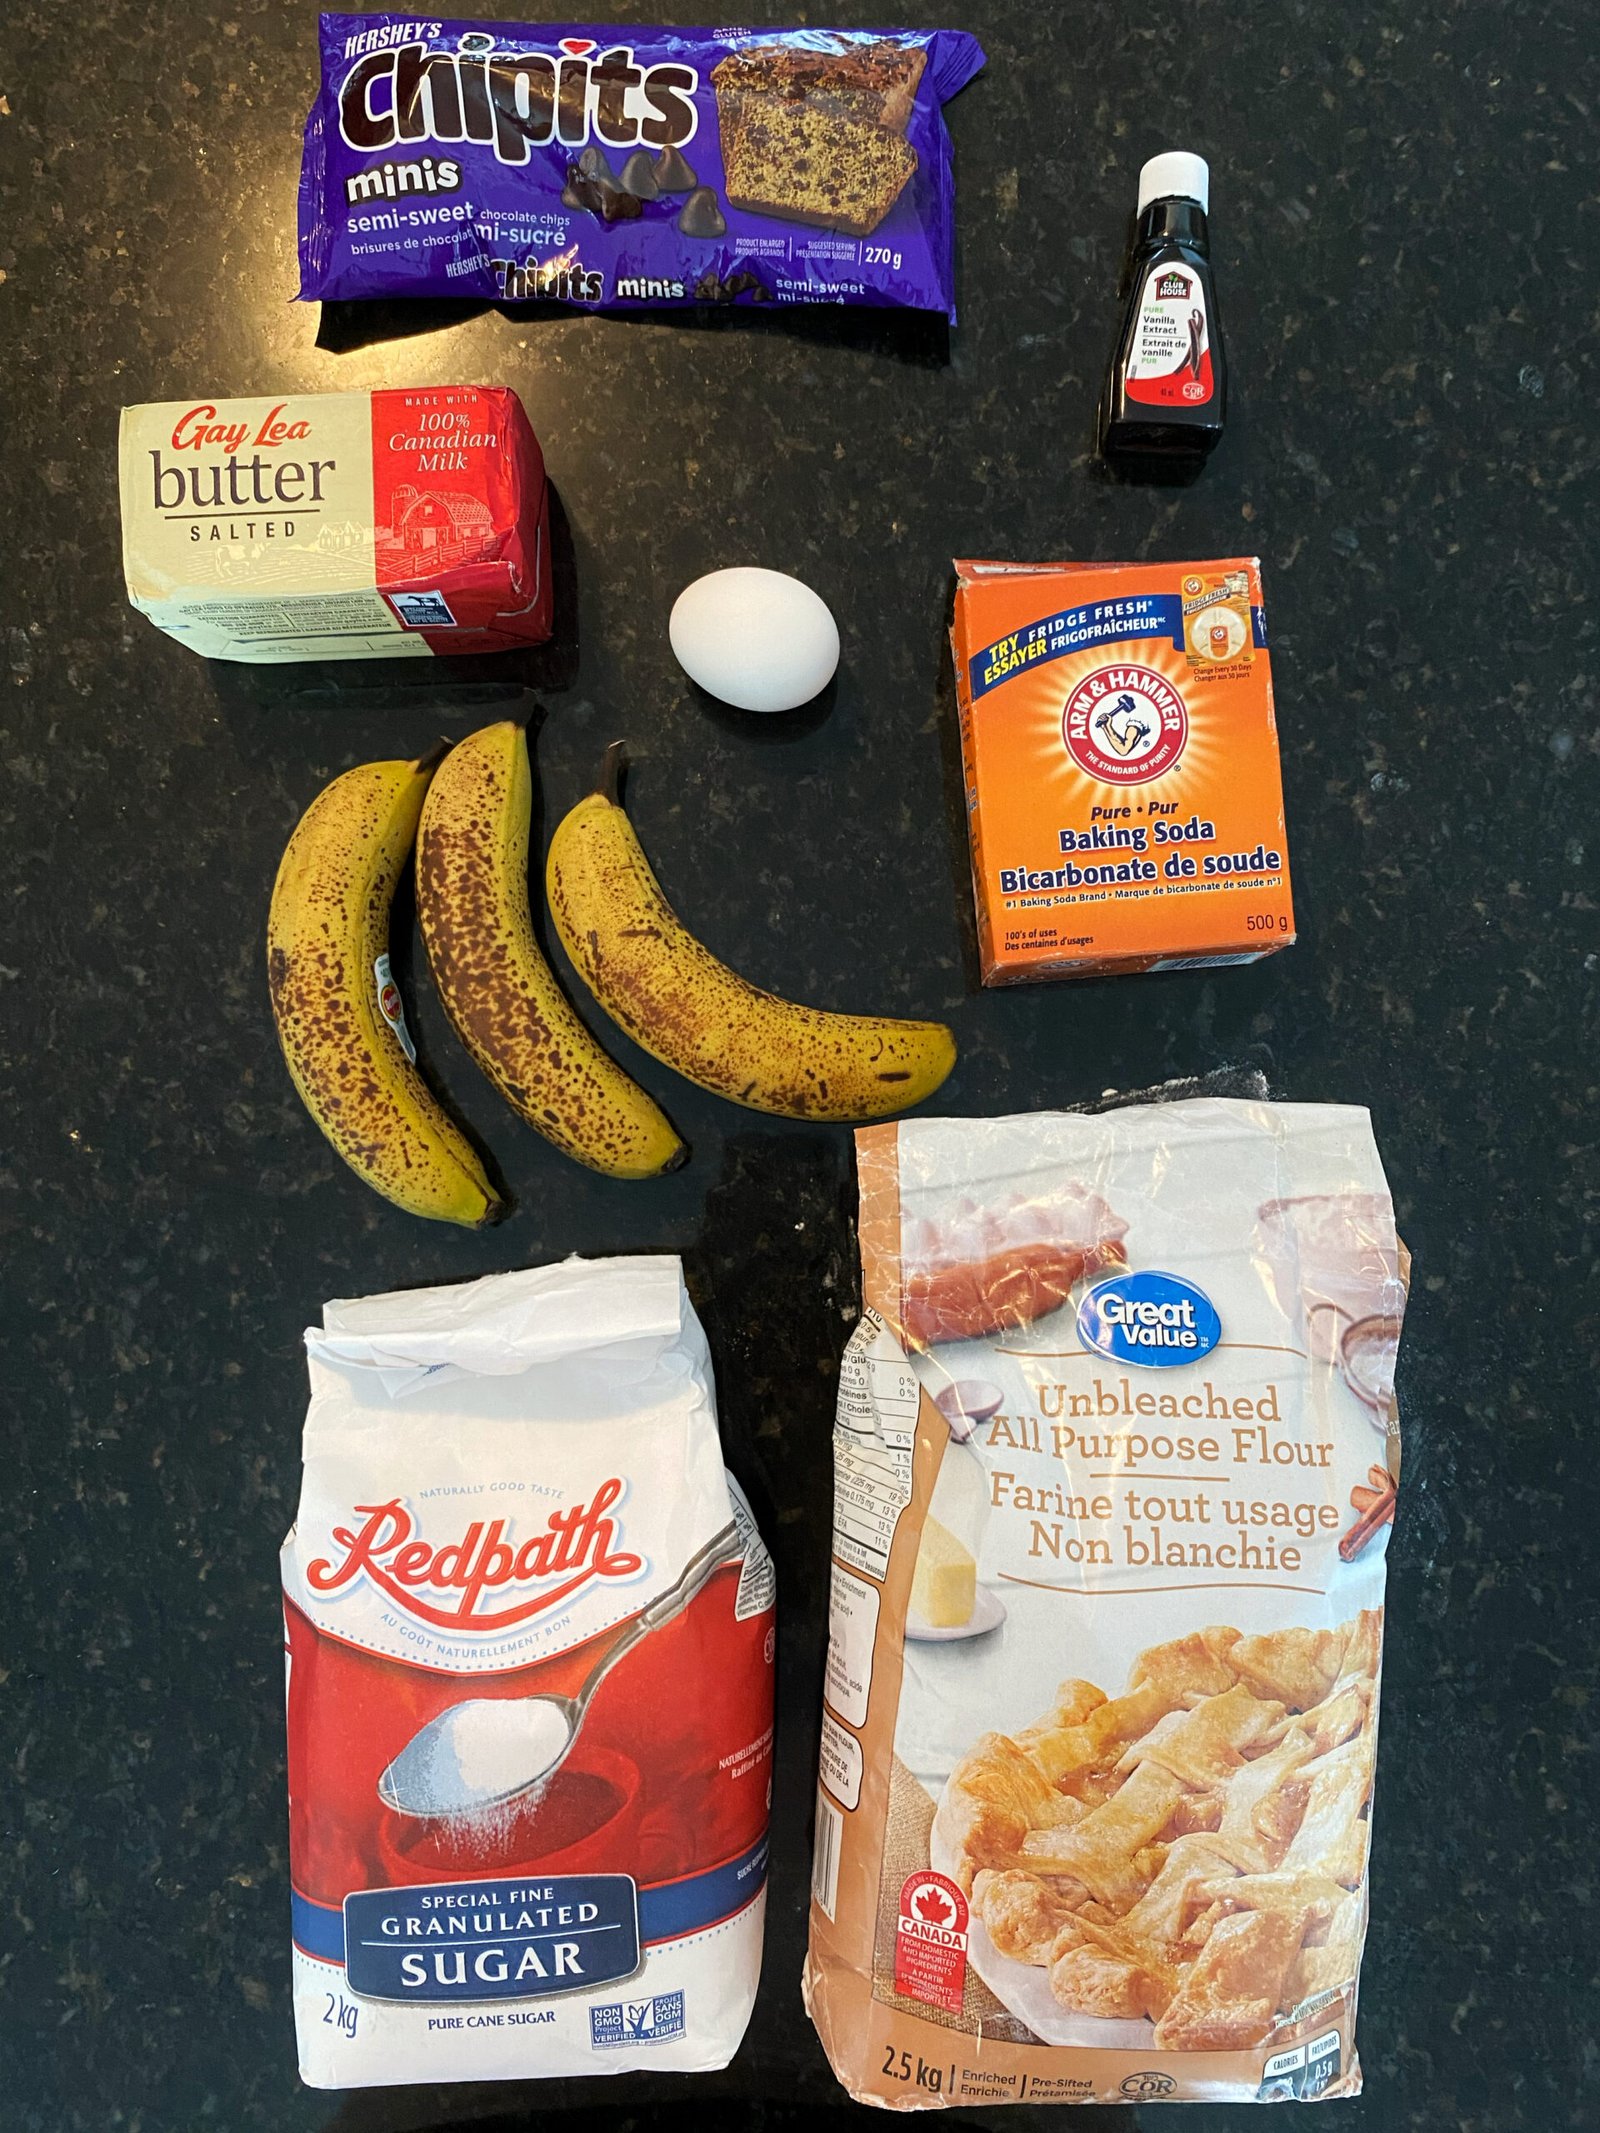 Chocolate Chip Banana Bread Ingredients